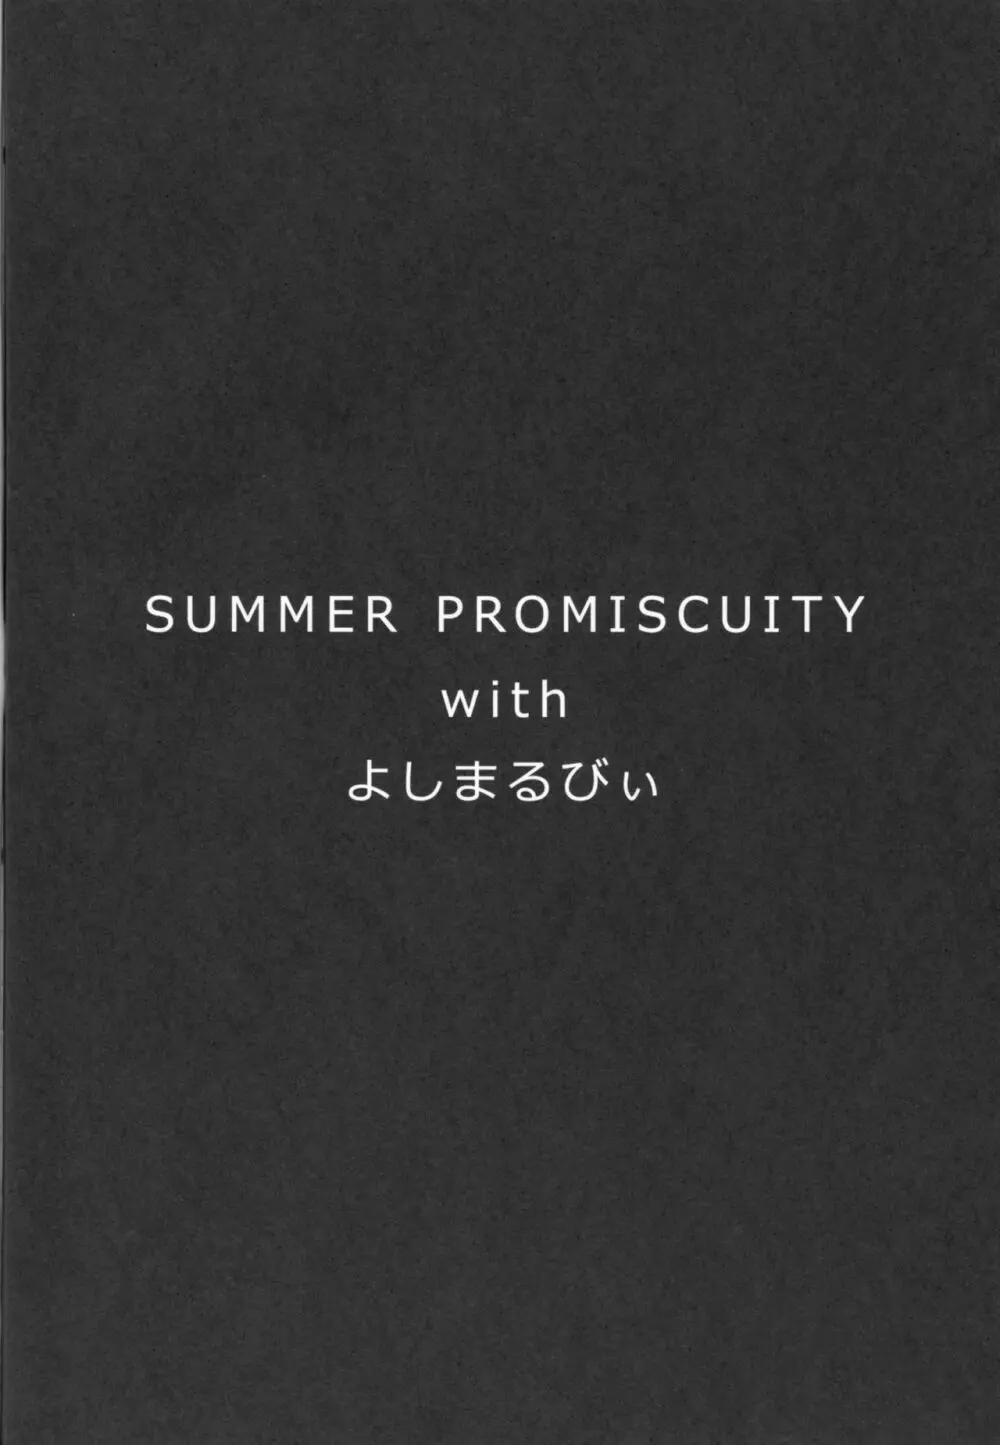 SUMMER PROMISCUITY withよしまるびぃ Page.3